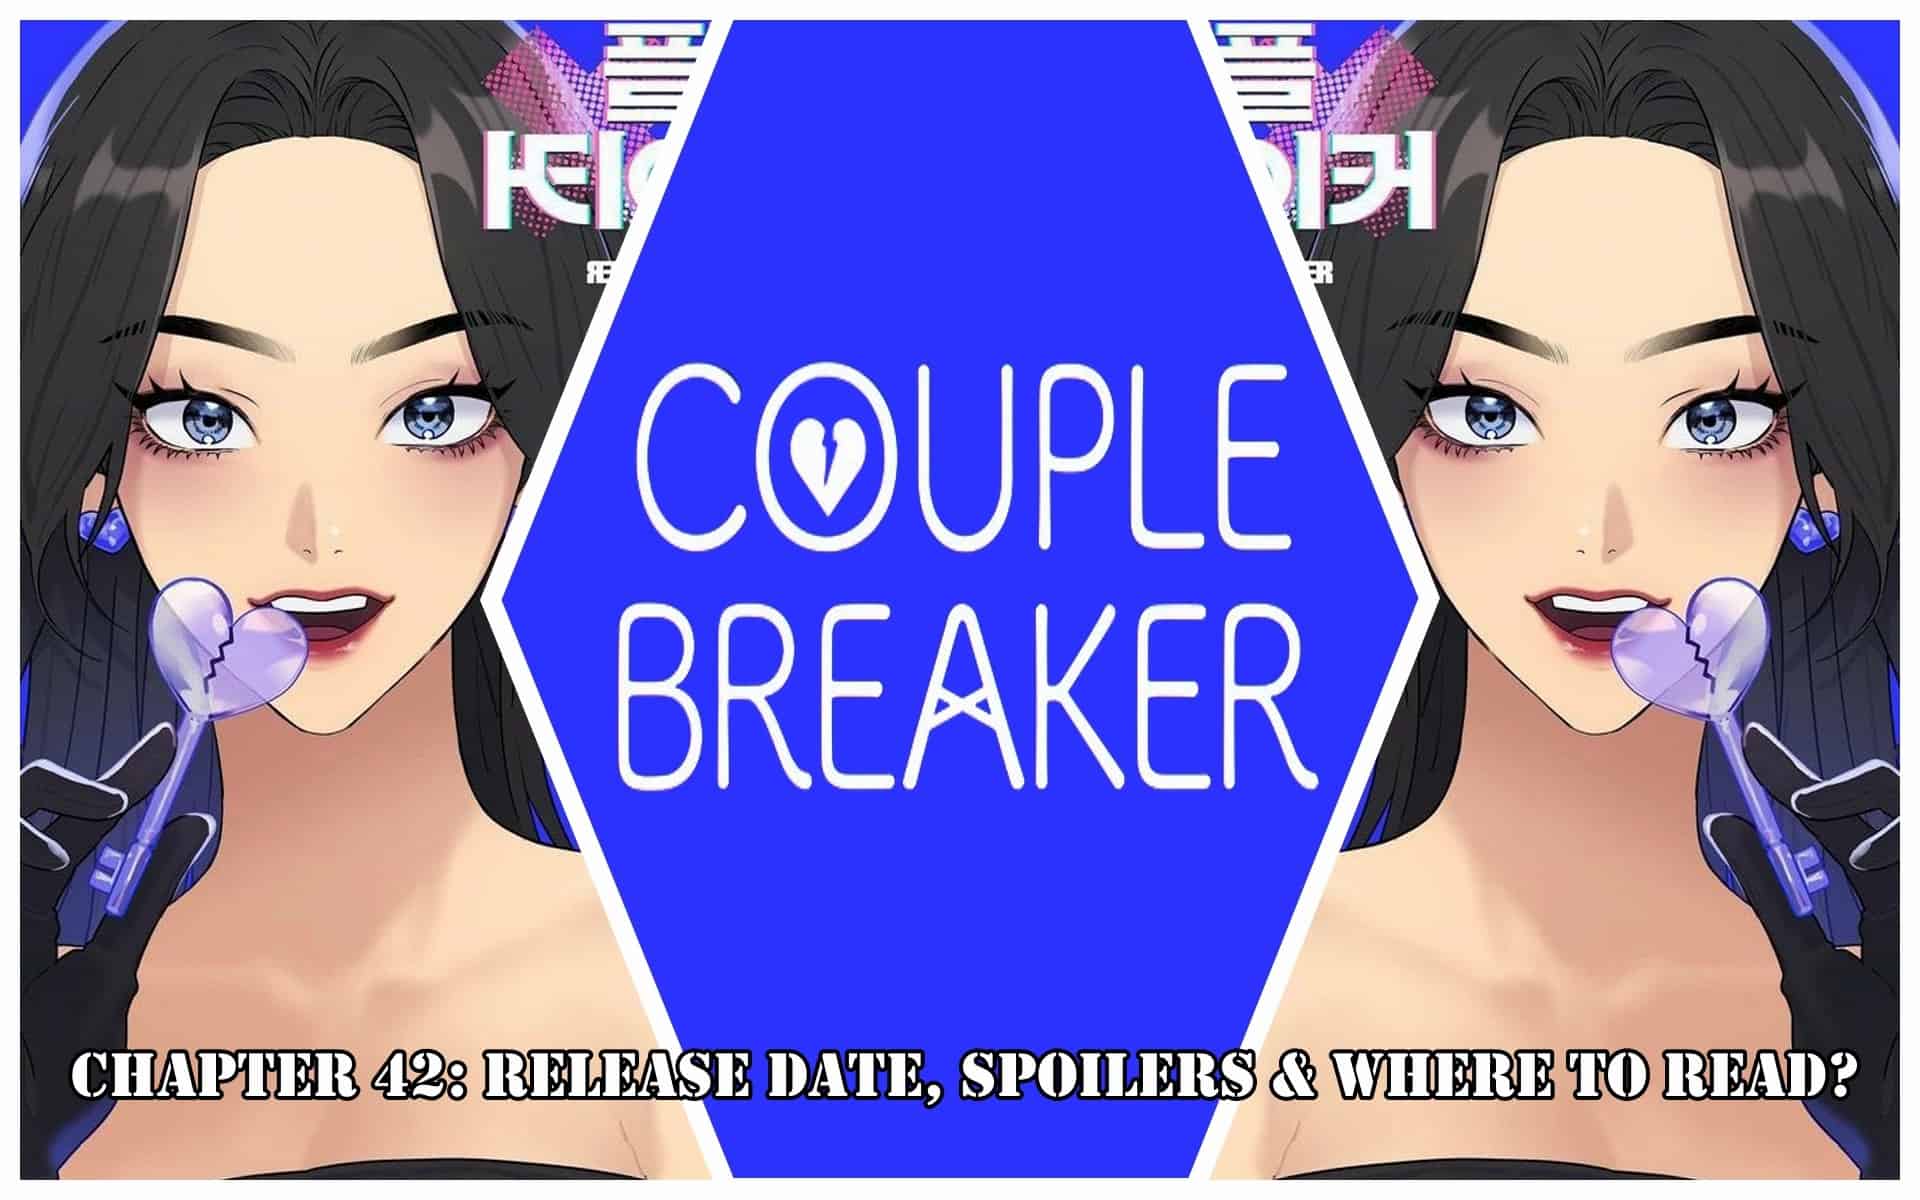 The Couple Breaker Chapter 42: Release Date, Spoilers & Where to Read?